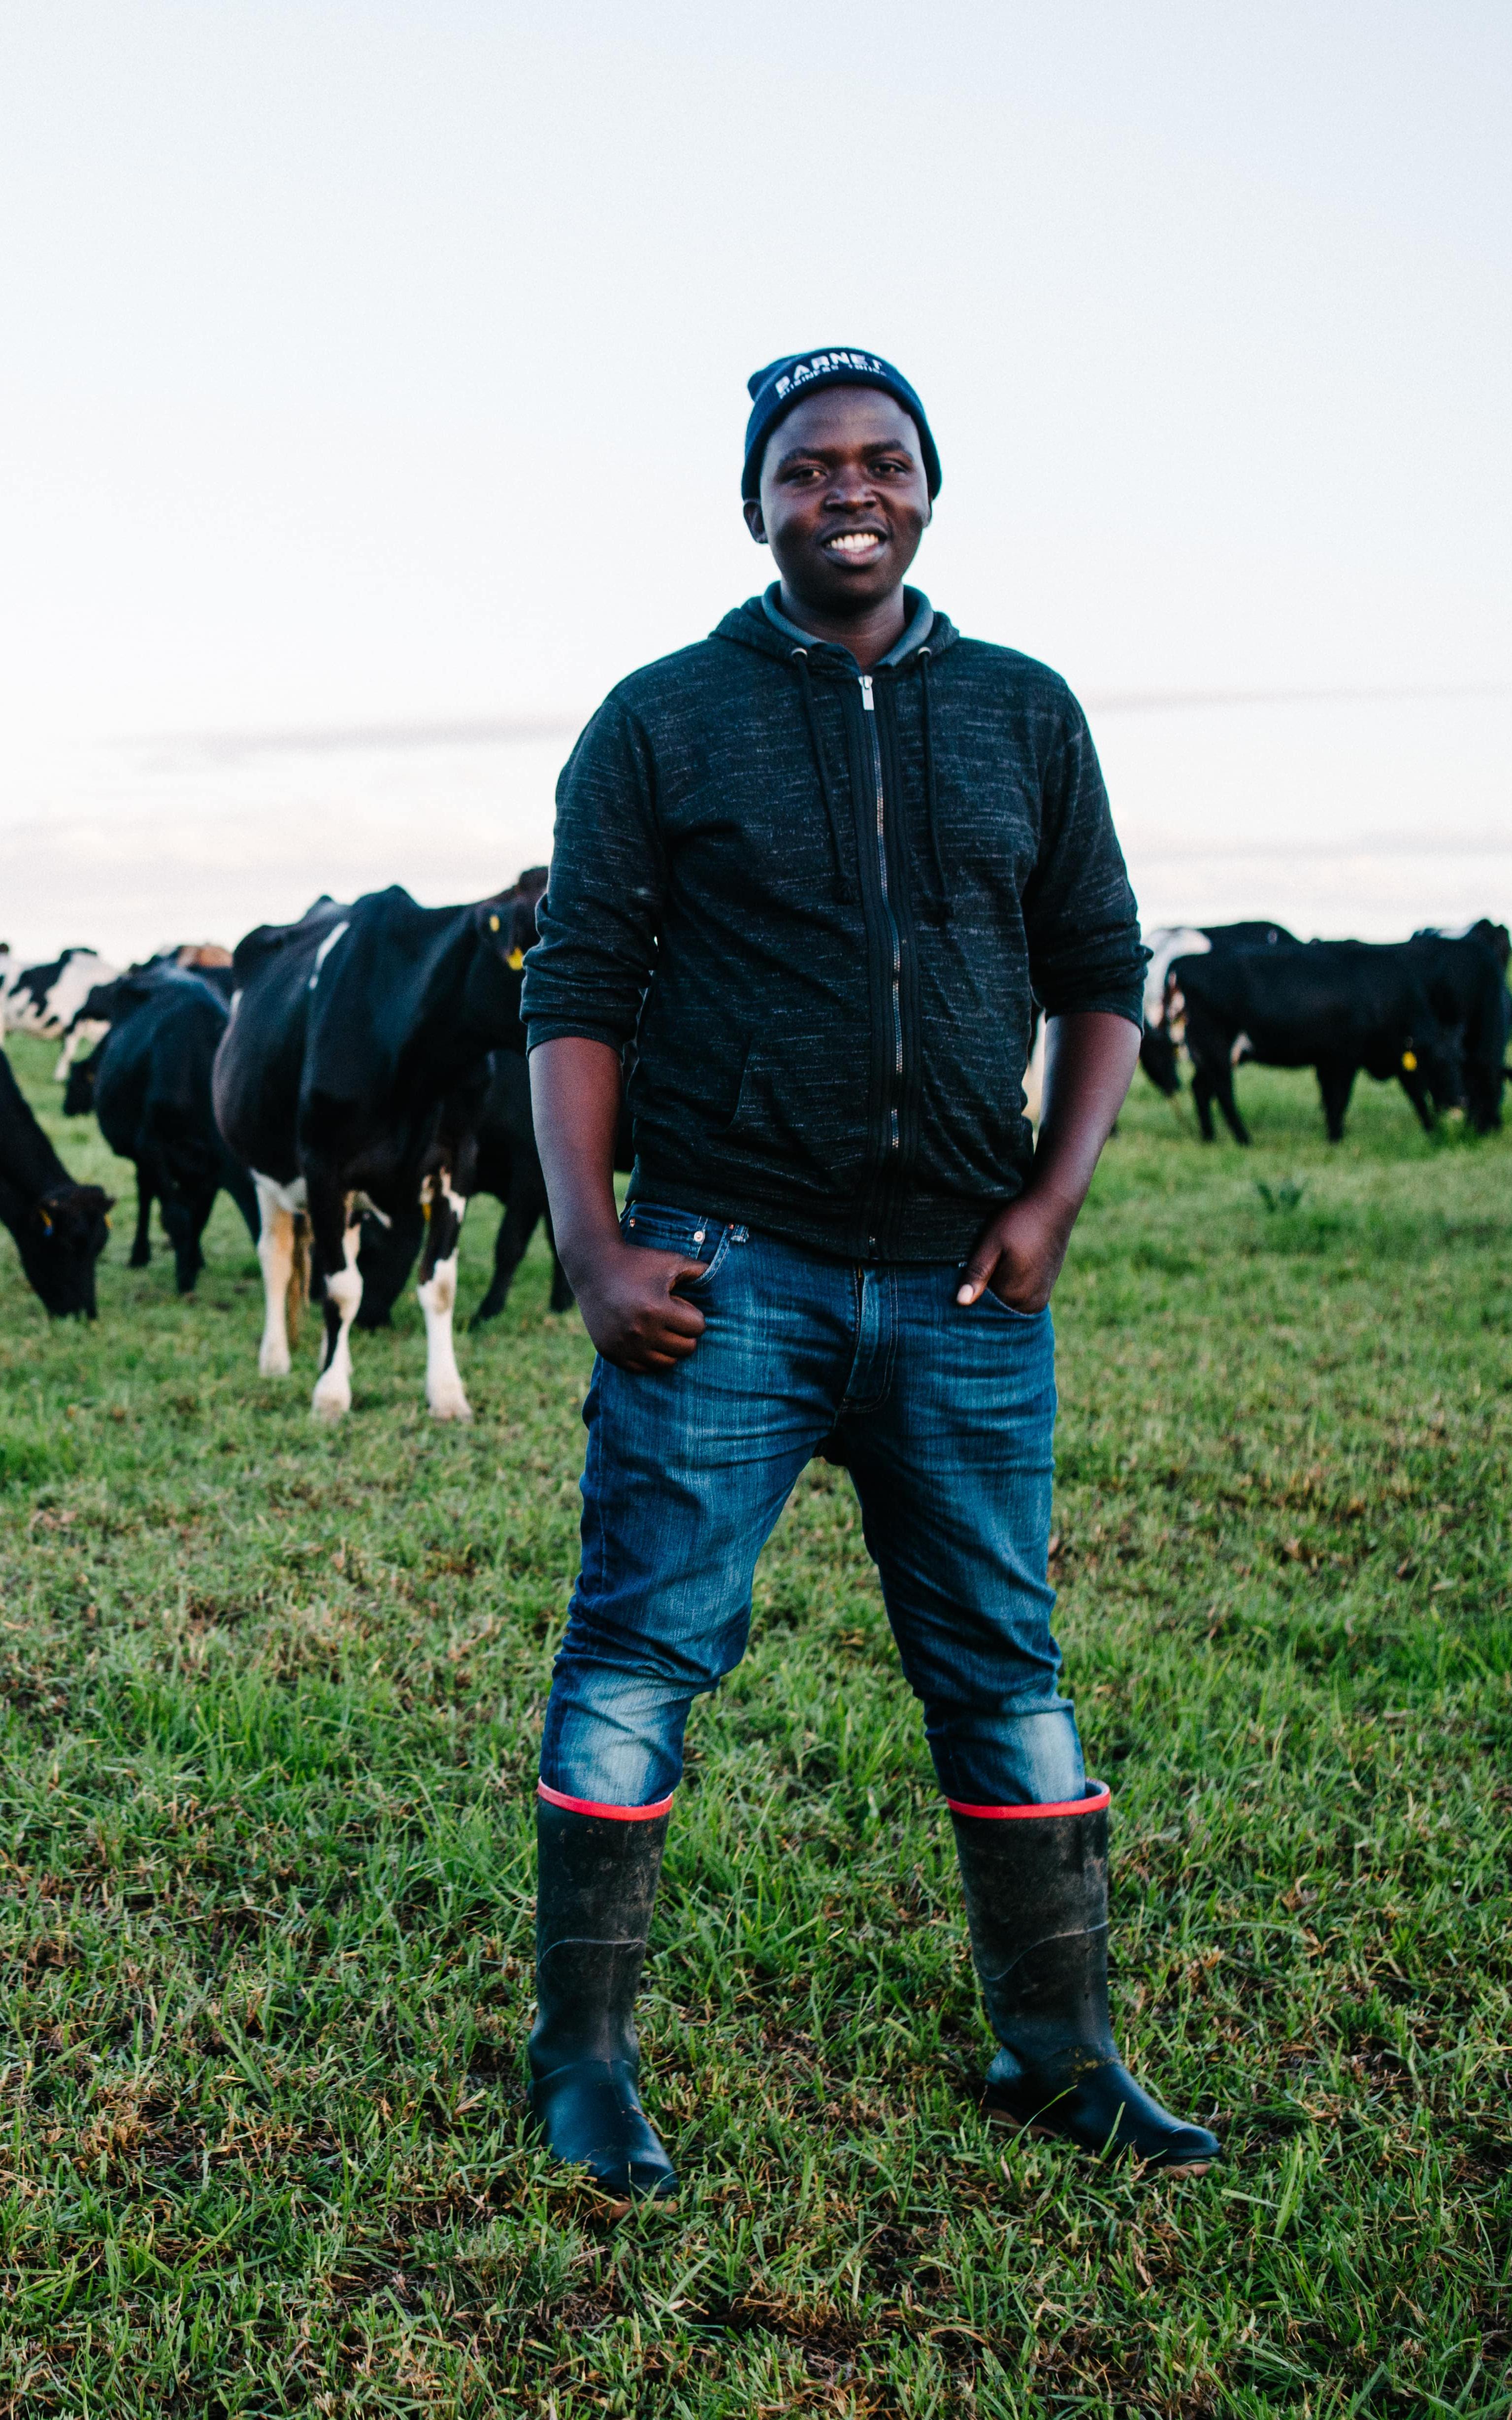 Black man smiling in front of a field of cows